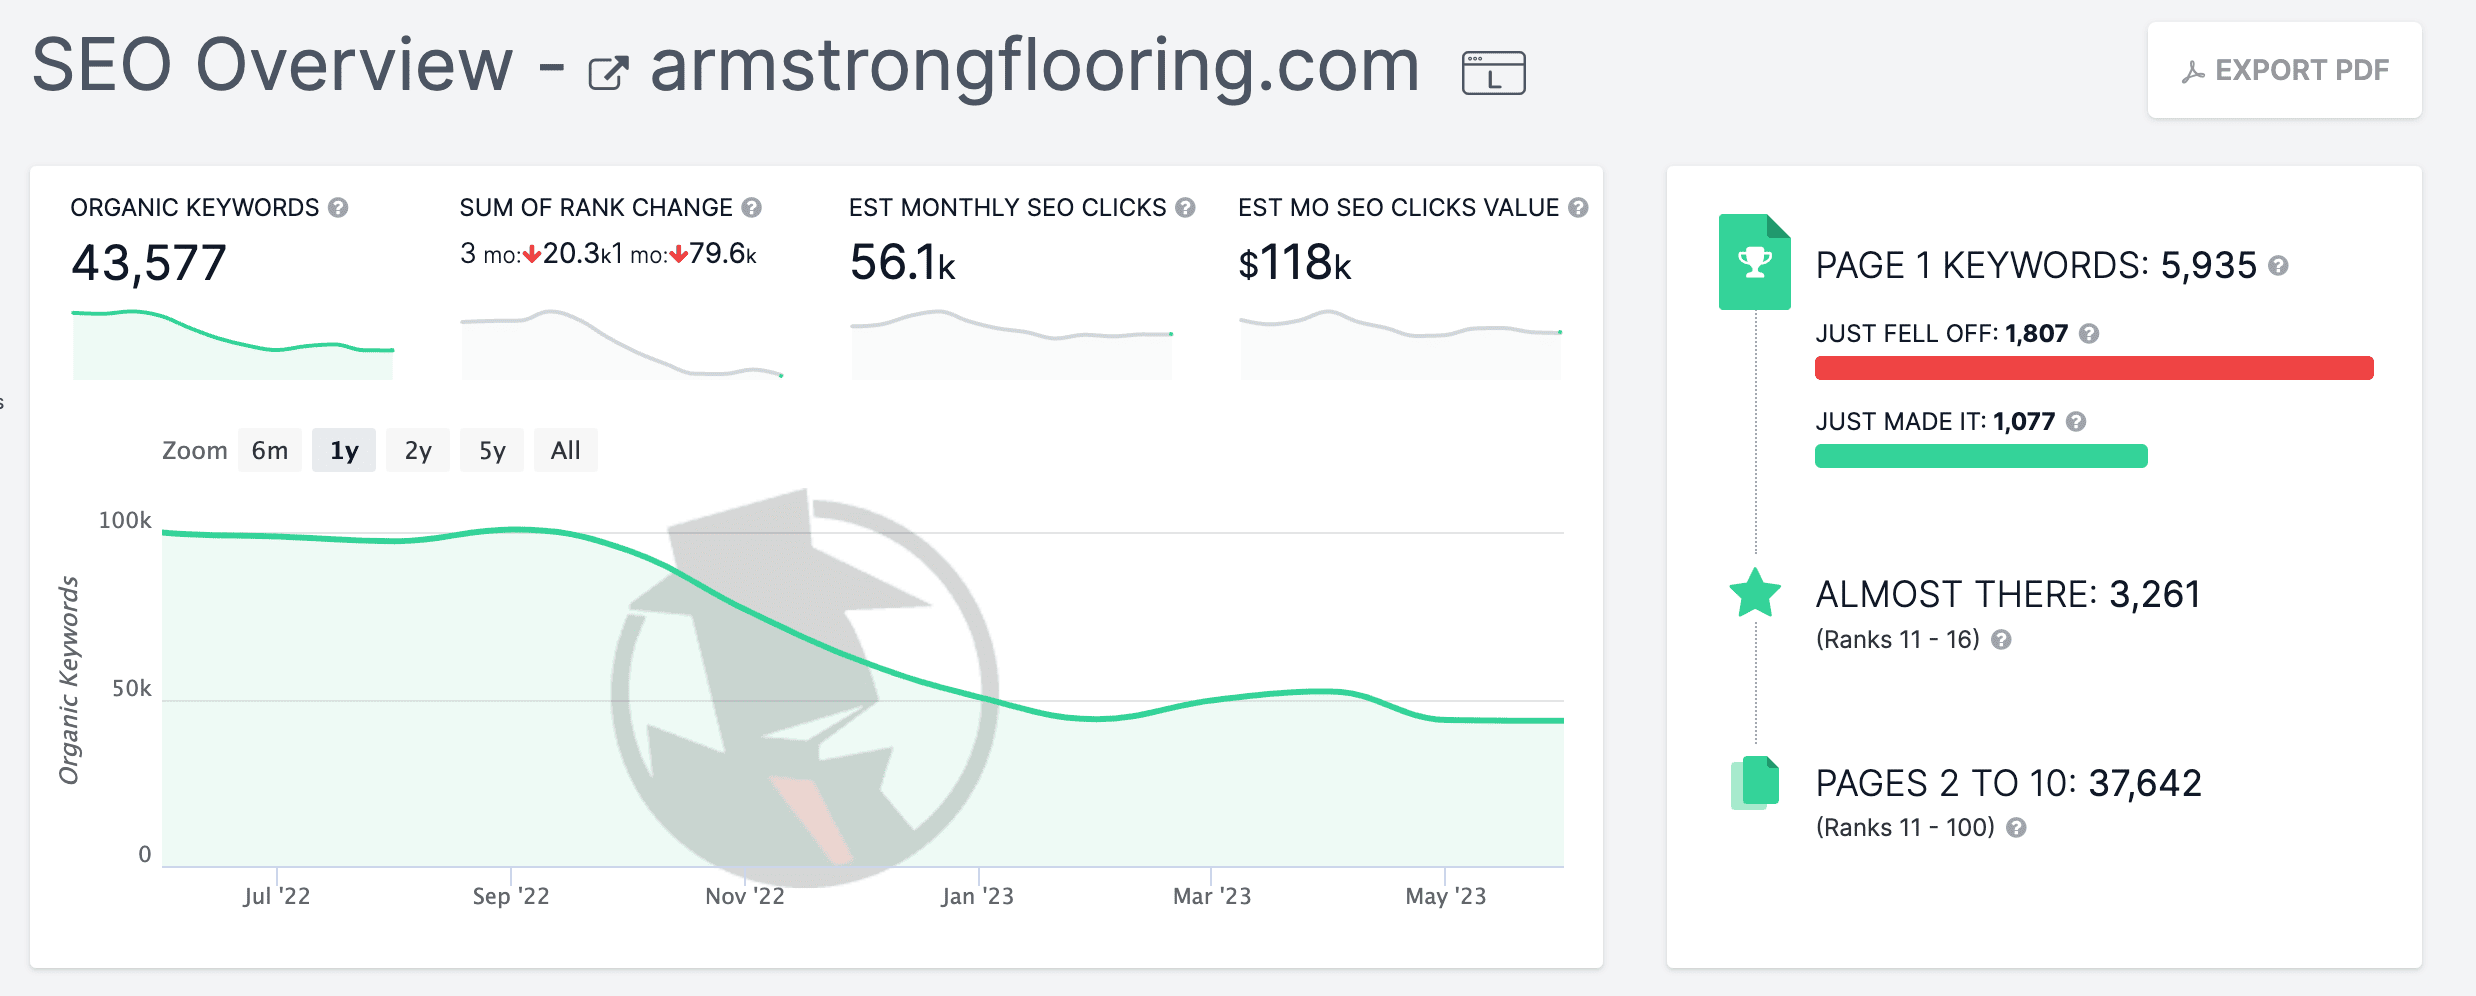 A SpyFu SEO Overview for armstrongflooring.com, with a chart showing a gradual decline in traffic, as well as how many organic keywords the site ranks for and the number of monthly SEO clicks.